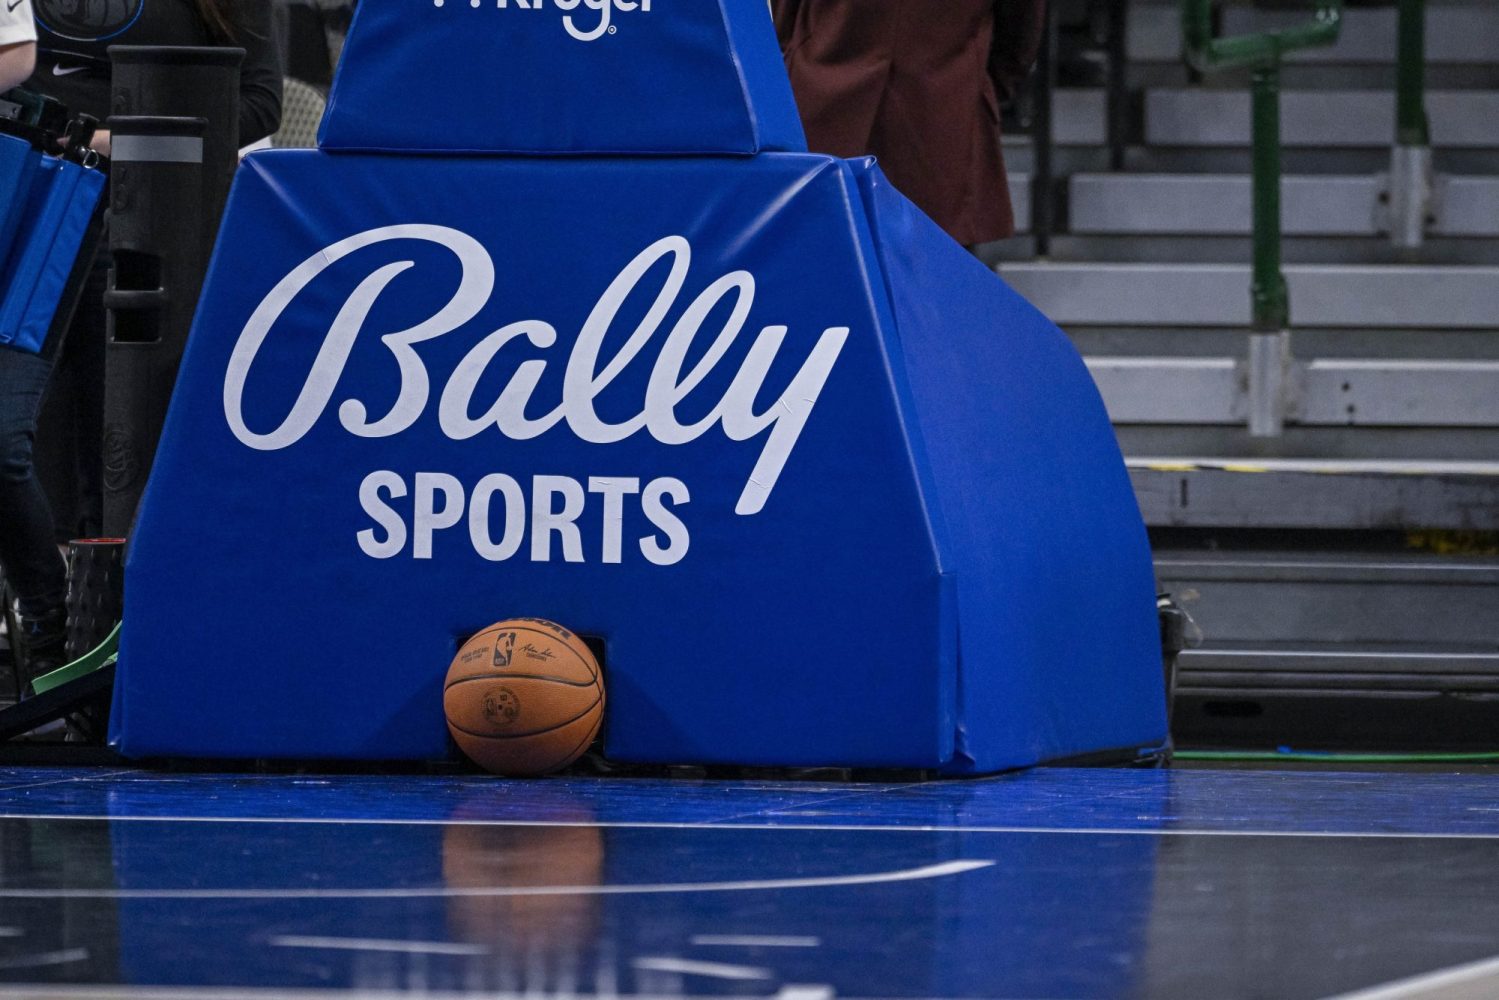 A view of a game ball and the Bally Sports logo on the stanchion post before the game between the Dallas Mavericks and the Orlando Magic at the American Airlines Center.